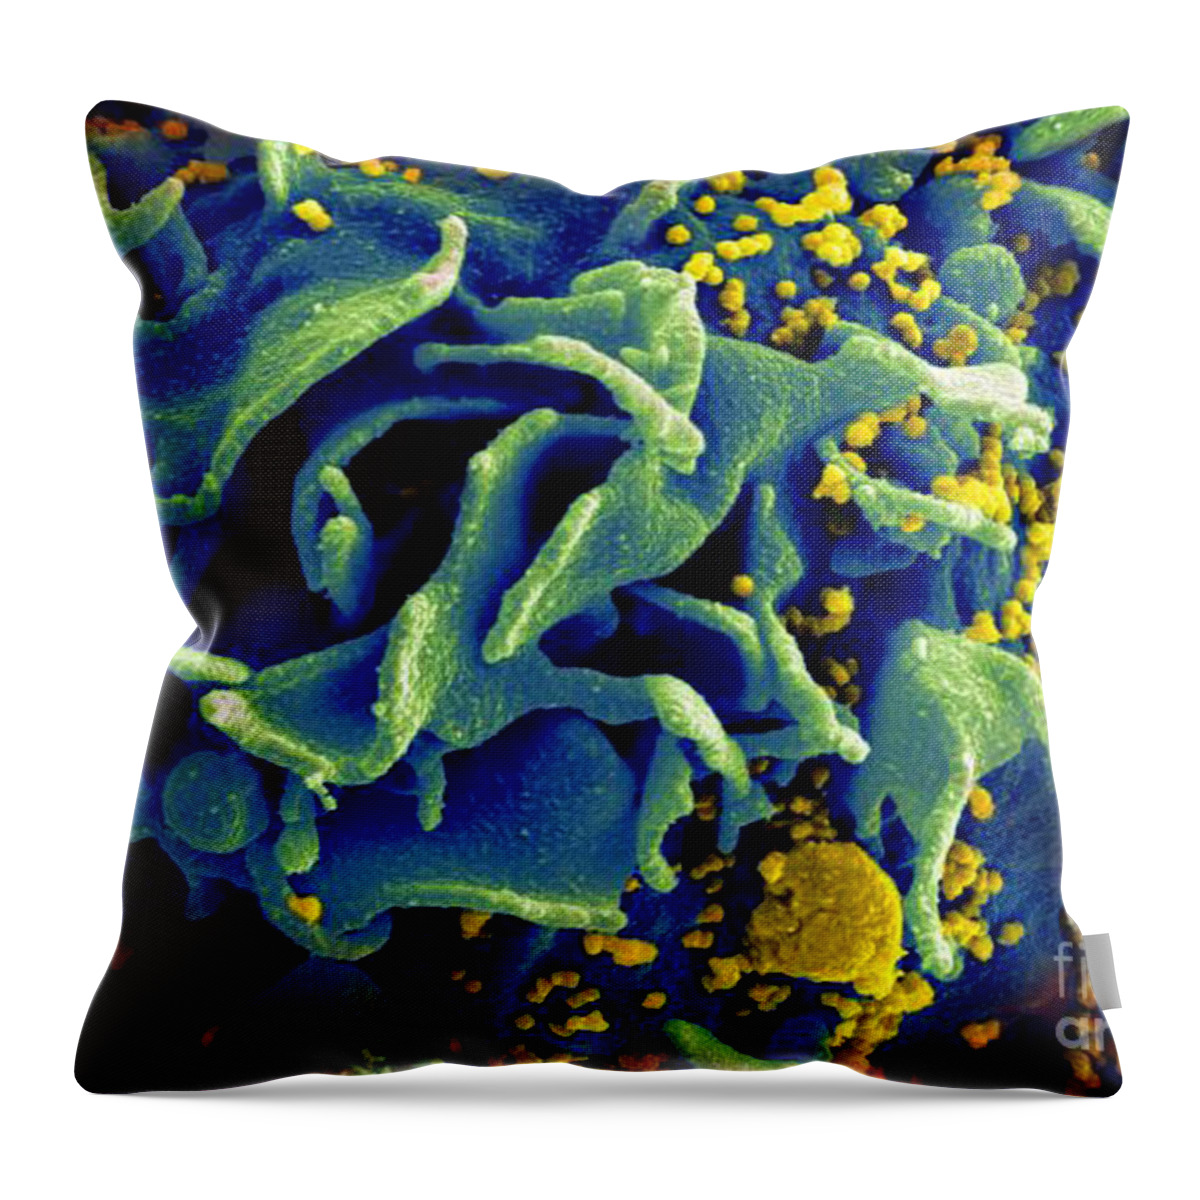 Microbiology Throw Pillow featuring the photograph Hiv-infected T Cell, Sem by Science Source